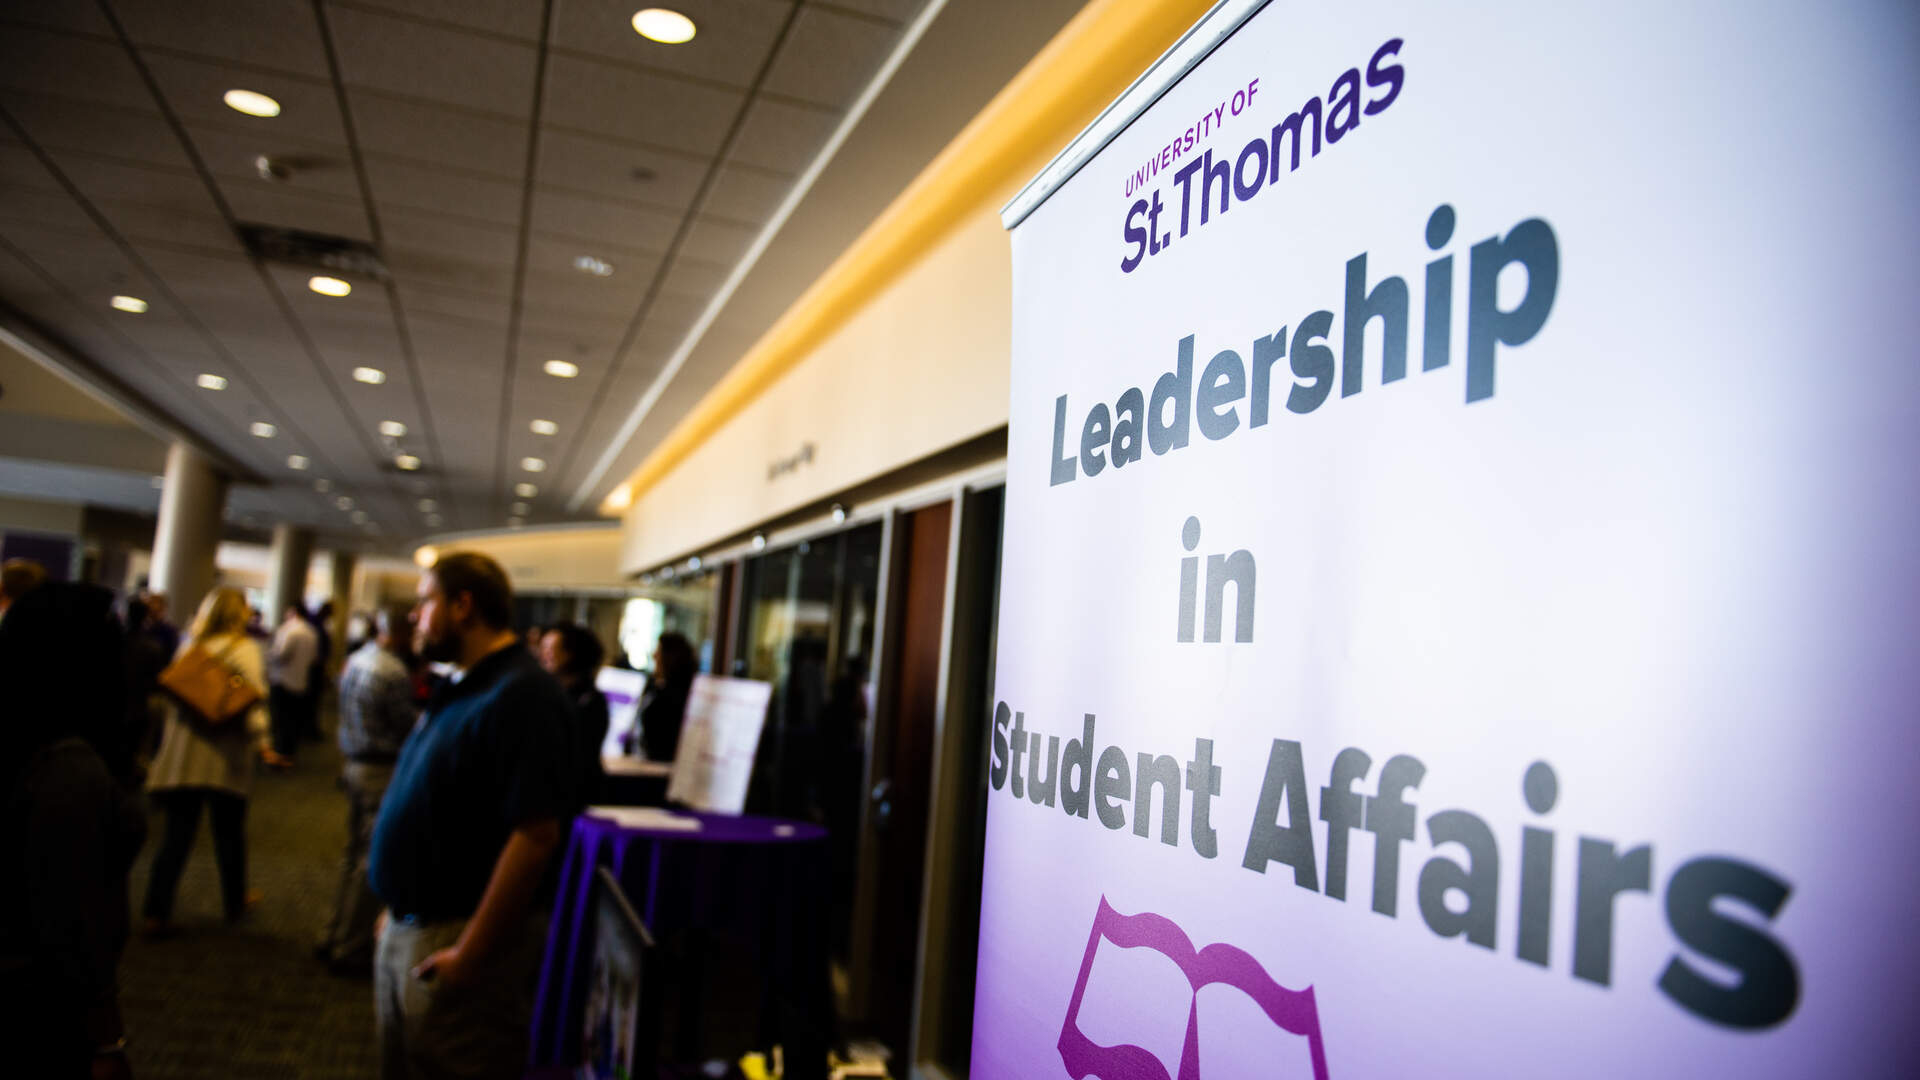 Leadership in Student Affairs banner at conference